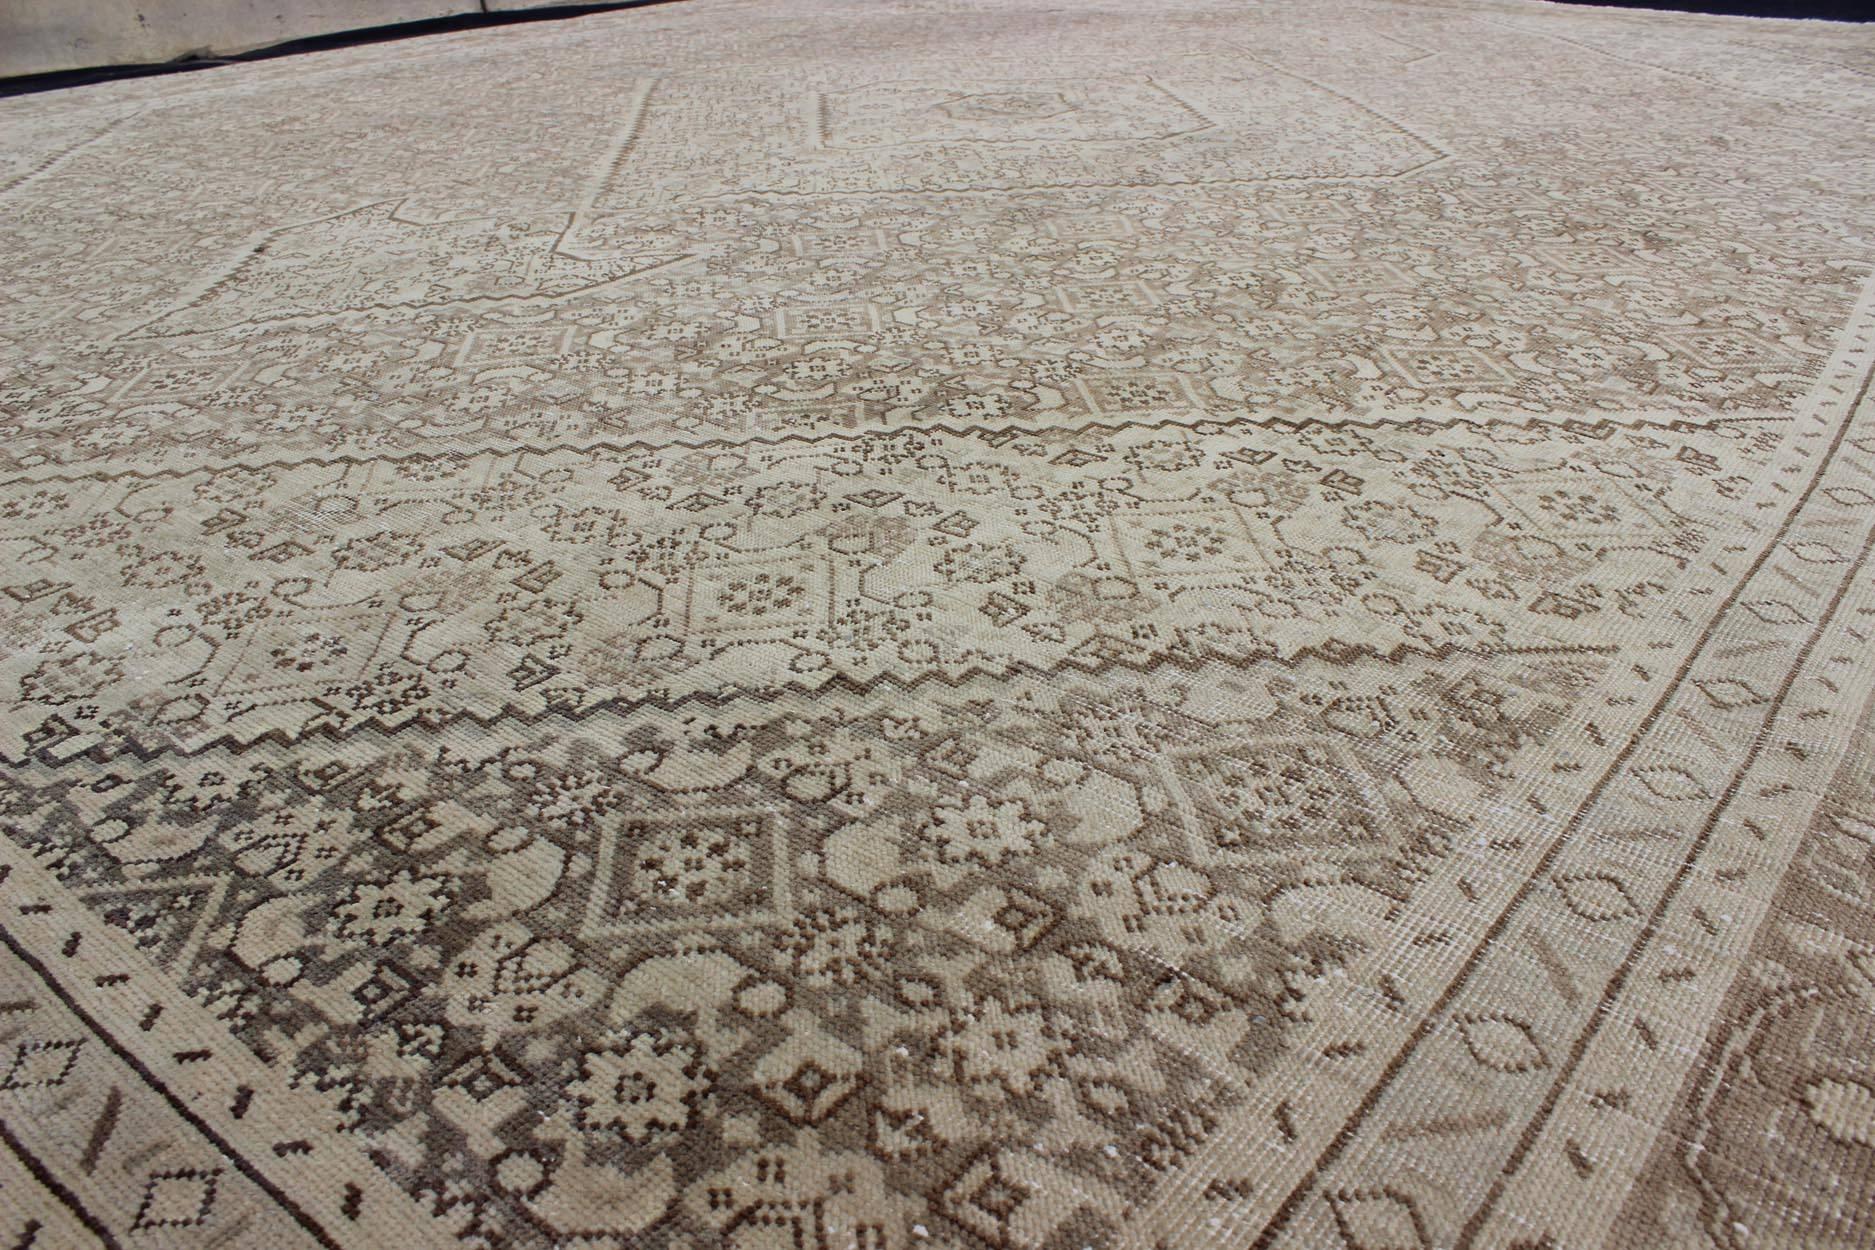 Hand-Knotted Antique Persian Tabriz Rug with Medallion in Brown, Tan, Taupe and Neutrals